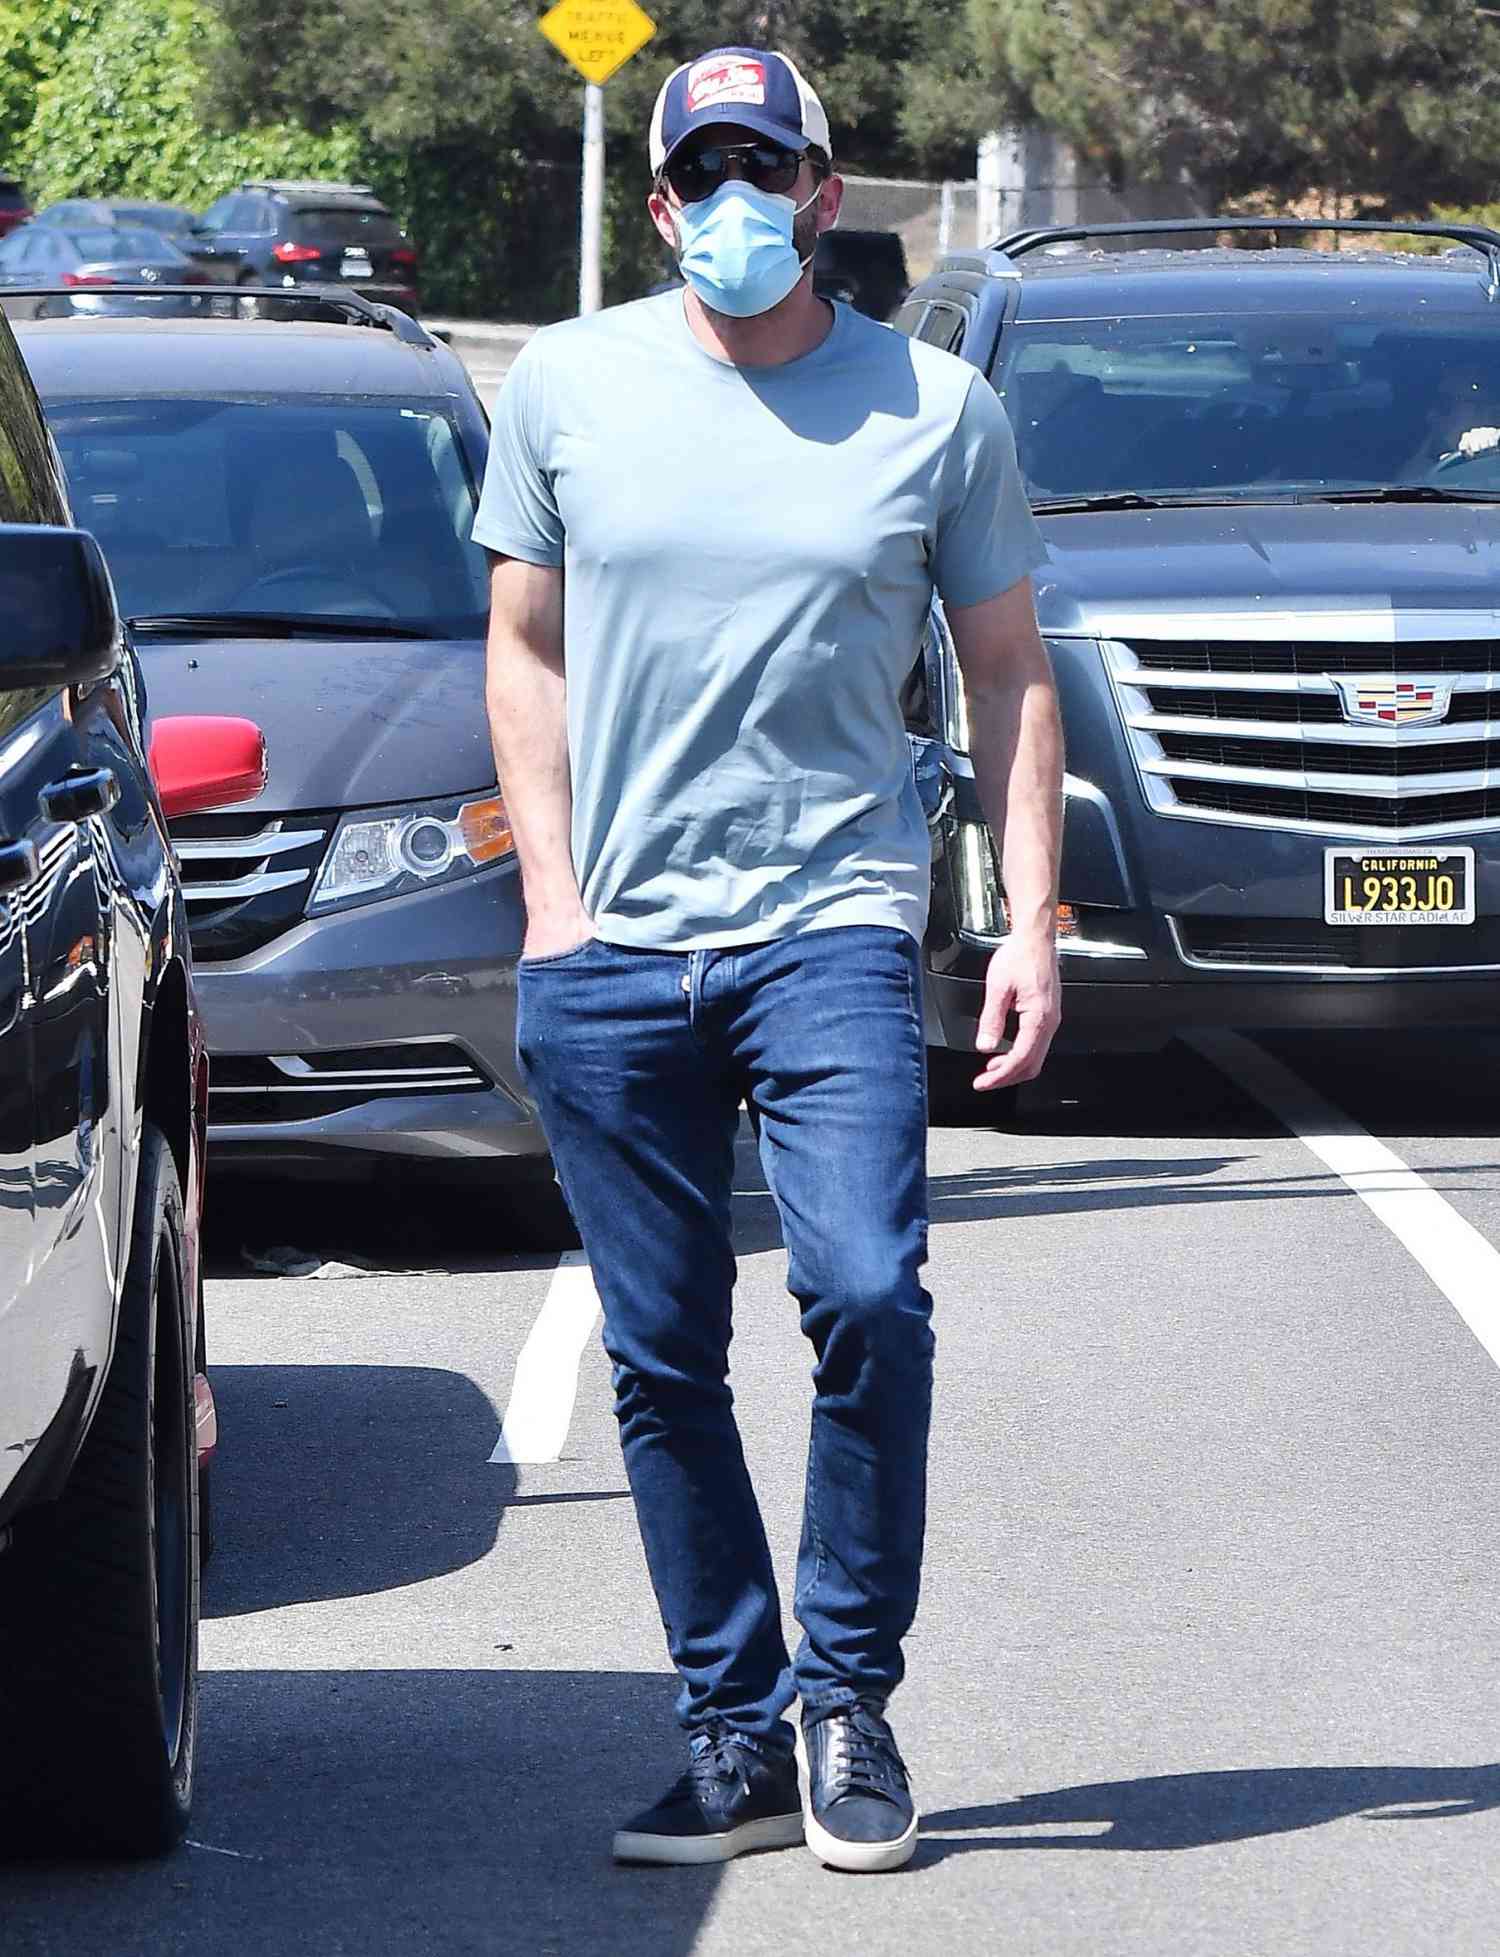 Ben Affleck is Pictured Back in Los Angeles After Visiting Girlfriend Jennifer Lopez in Miami Earlier This Week.